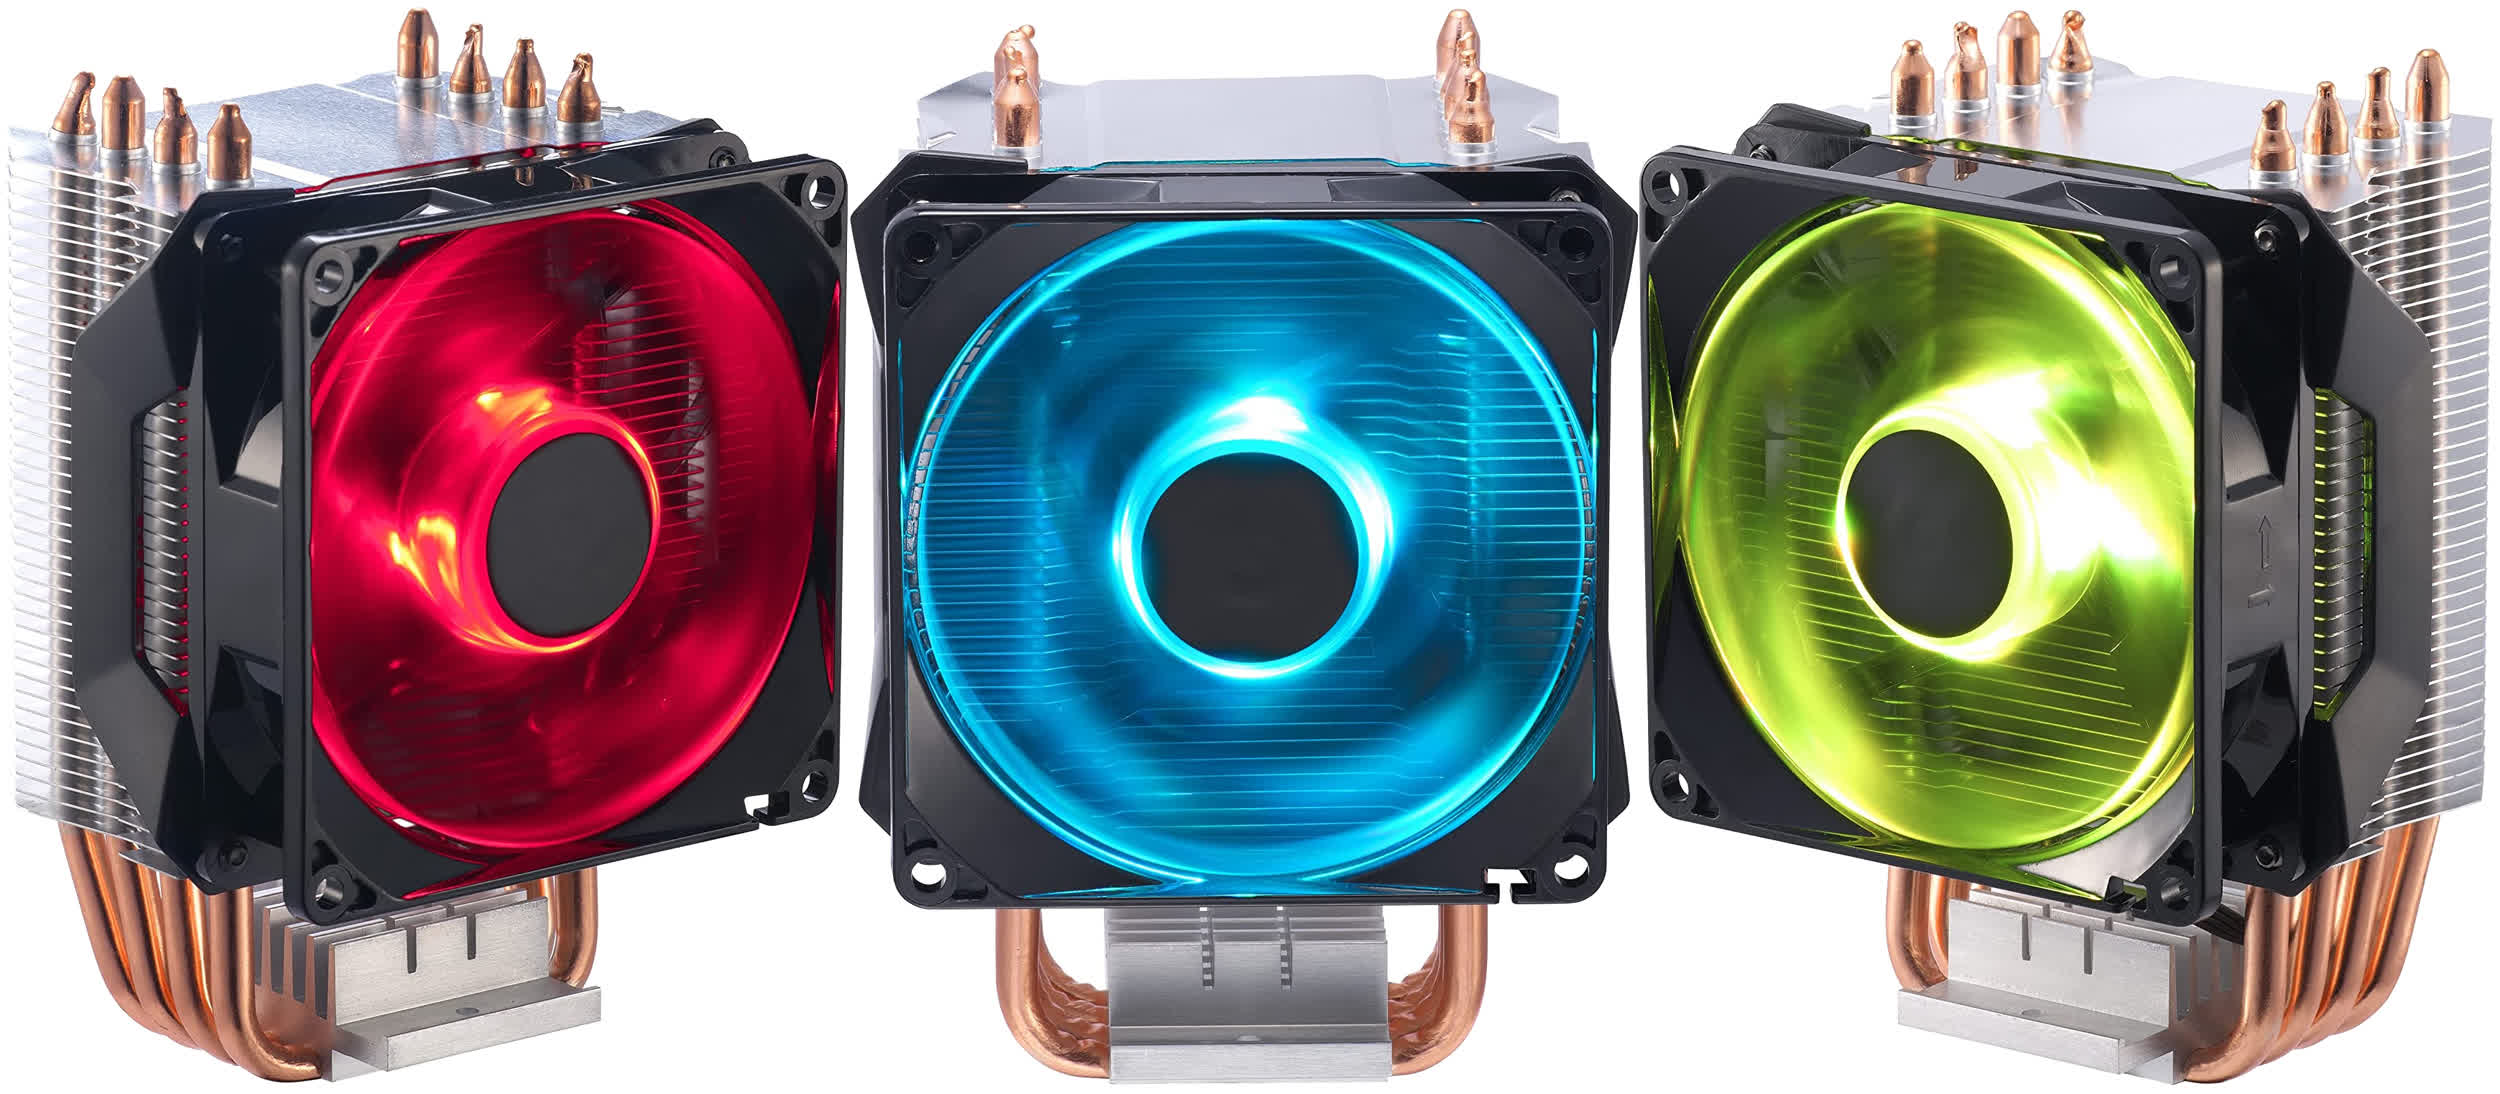 Amazon's first CPU cooler is a rebranded Cooler Master model, for half the price